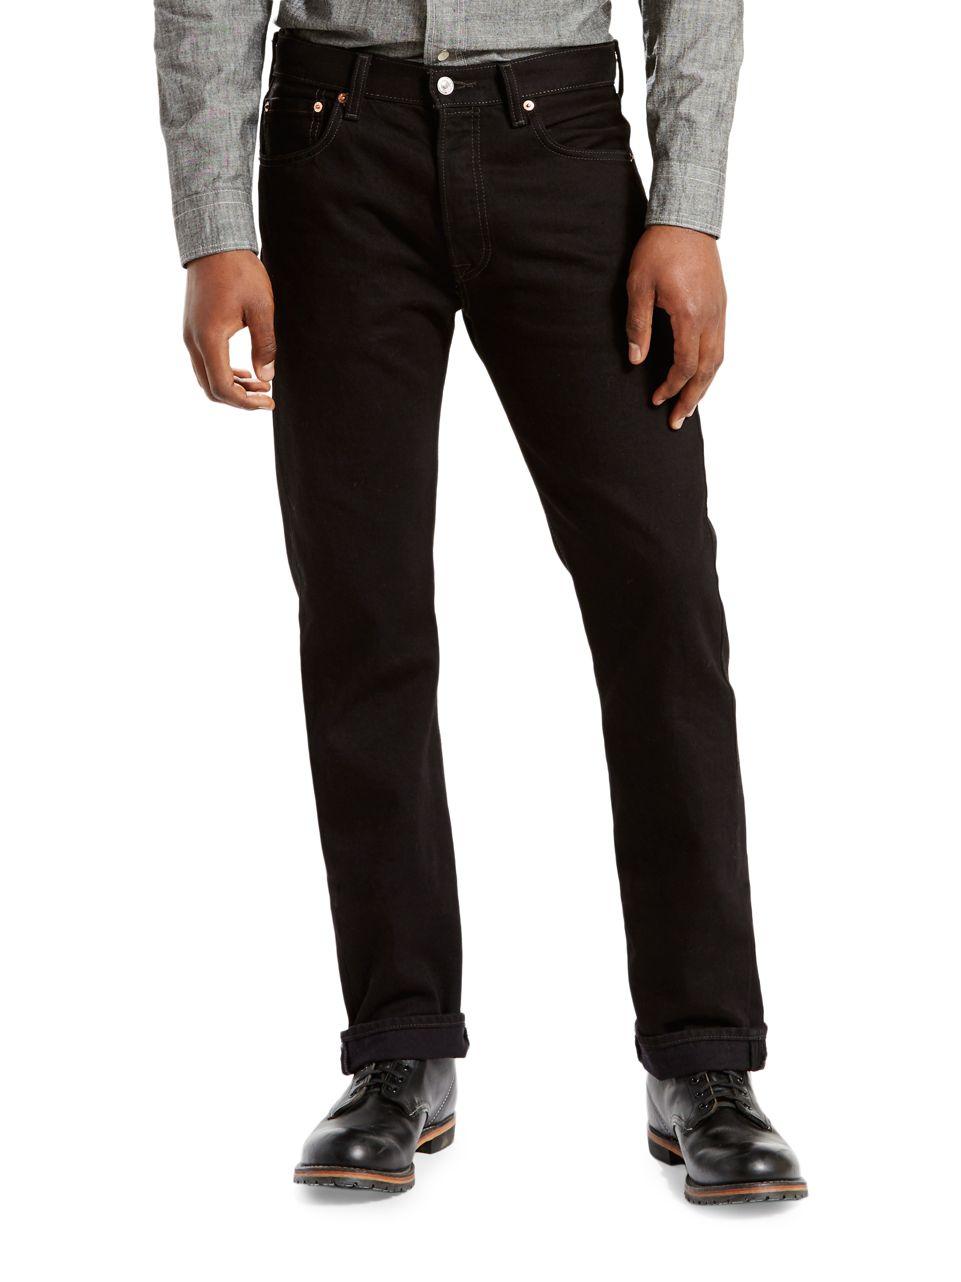 Lyst - Levi'S Big And Tall 501 Black Jeans in Black for Men